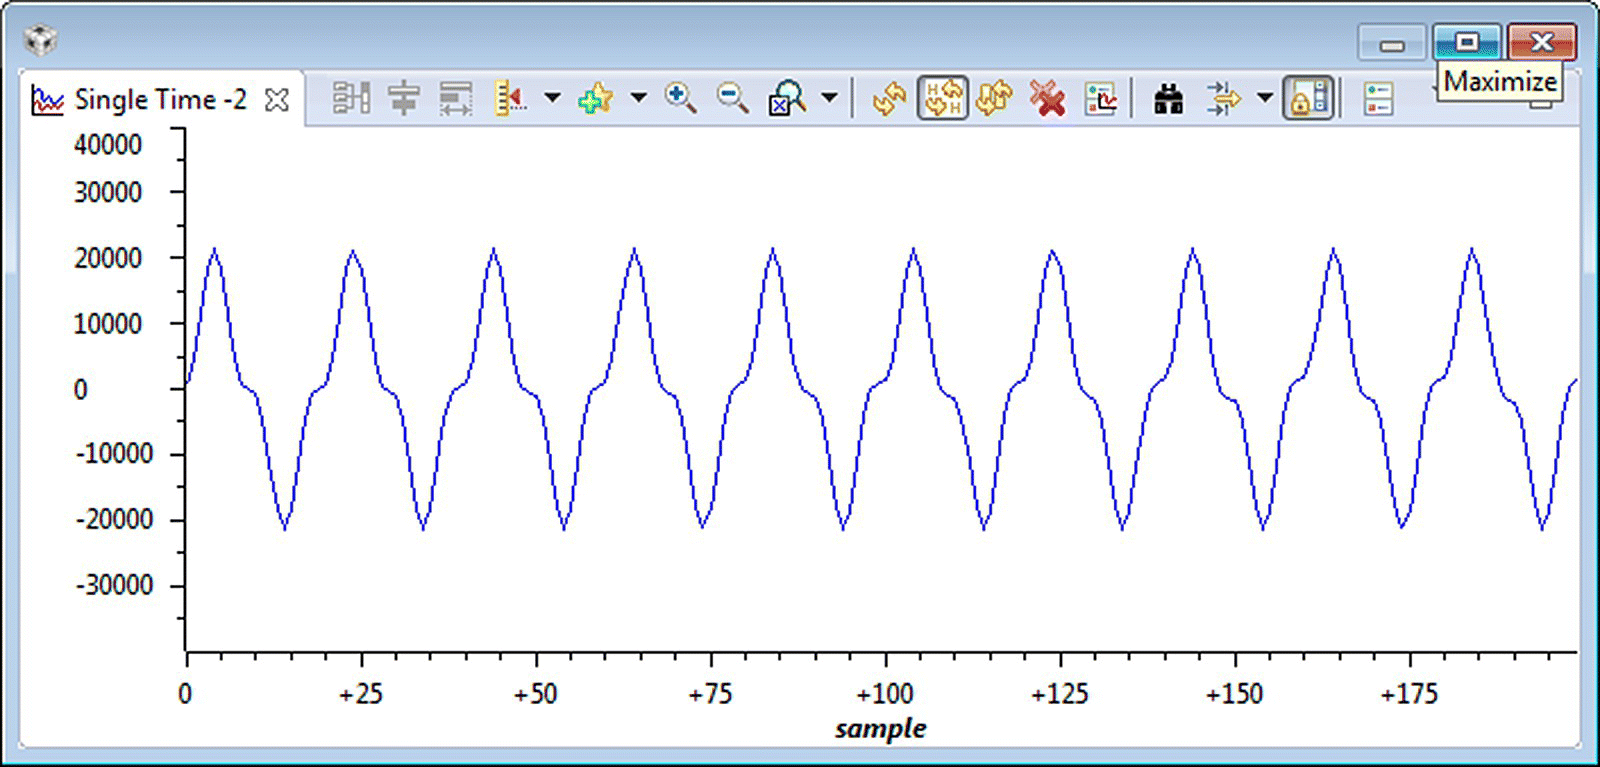 A window displaying the input data, illustrated by a wave plot with label “Single Time -2” at the top left.